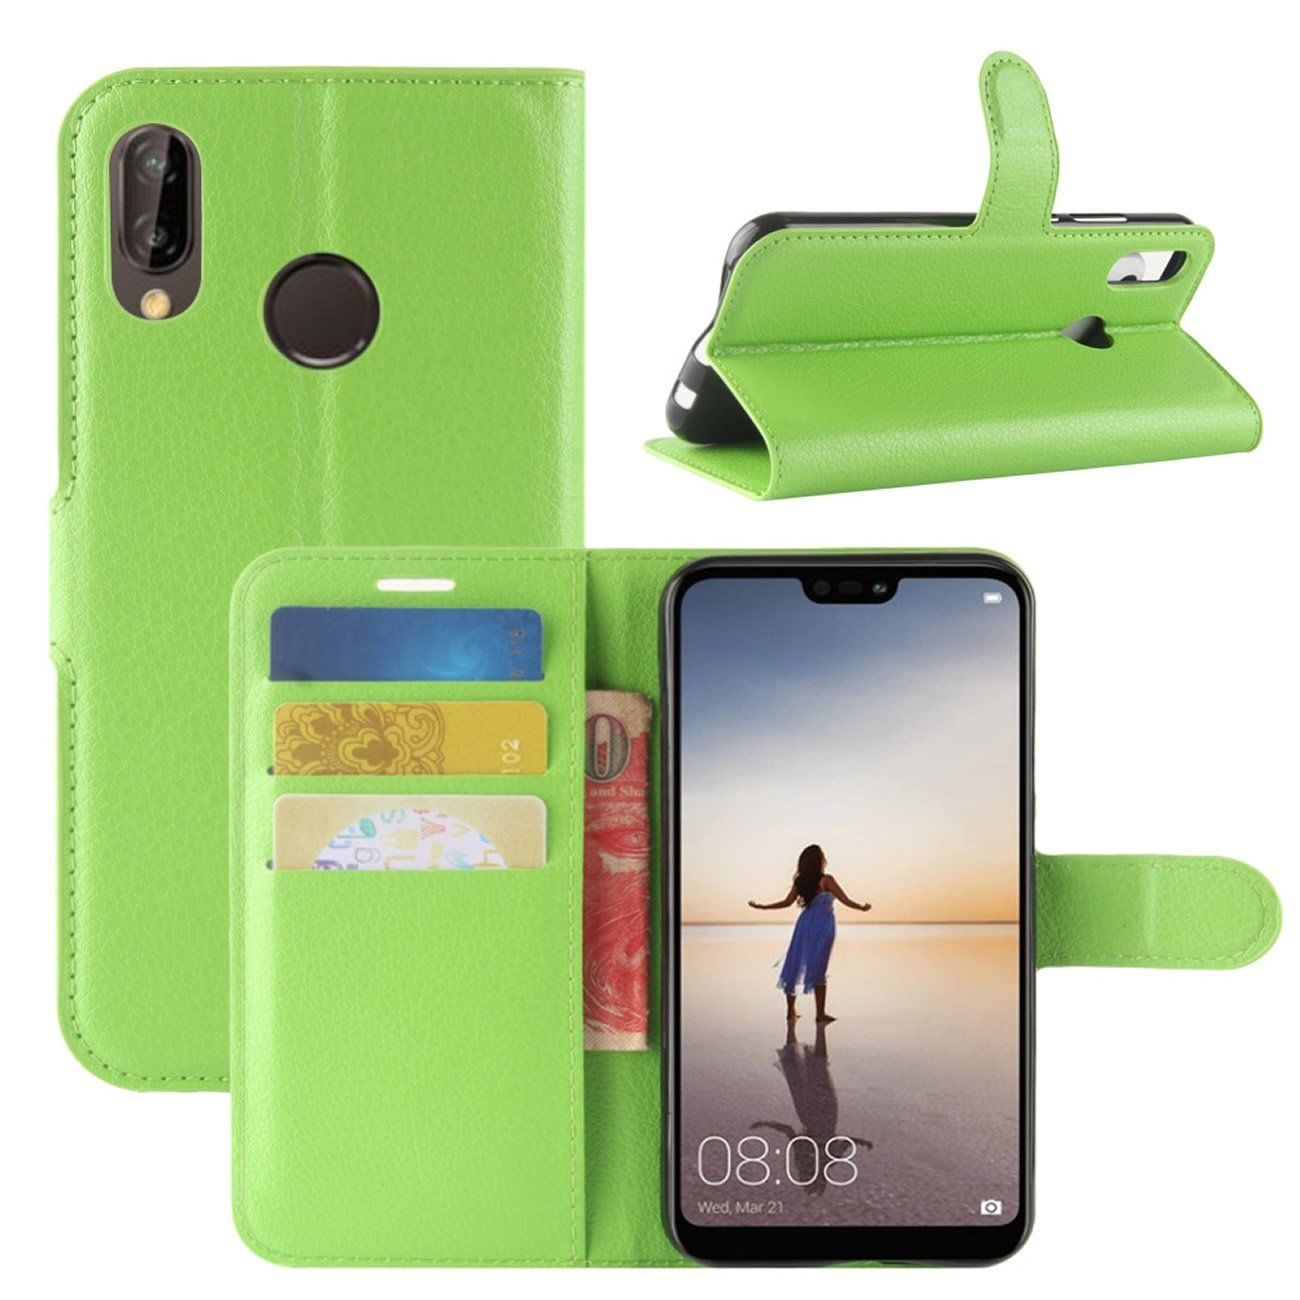 New Premium Leather Wallet Case TPU Cover For HUAWEI Nova 3i-Green